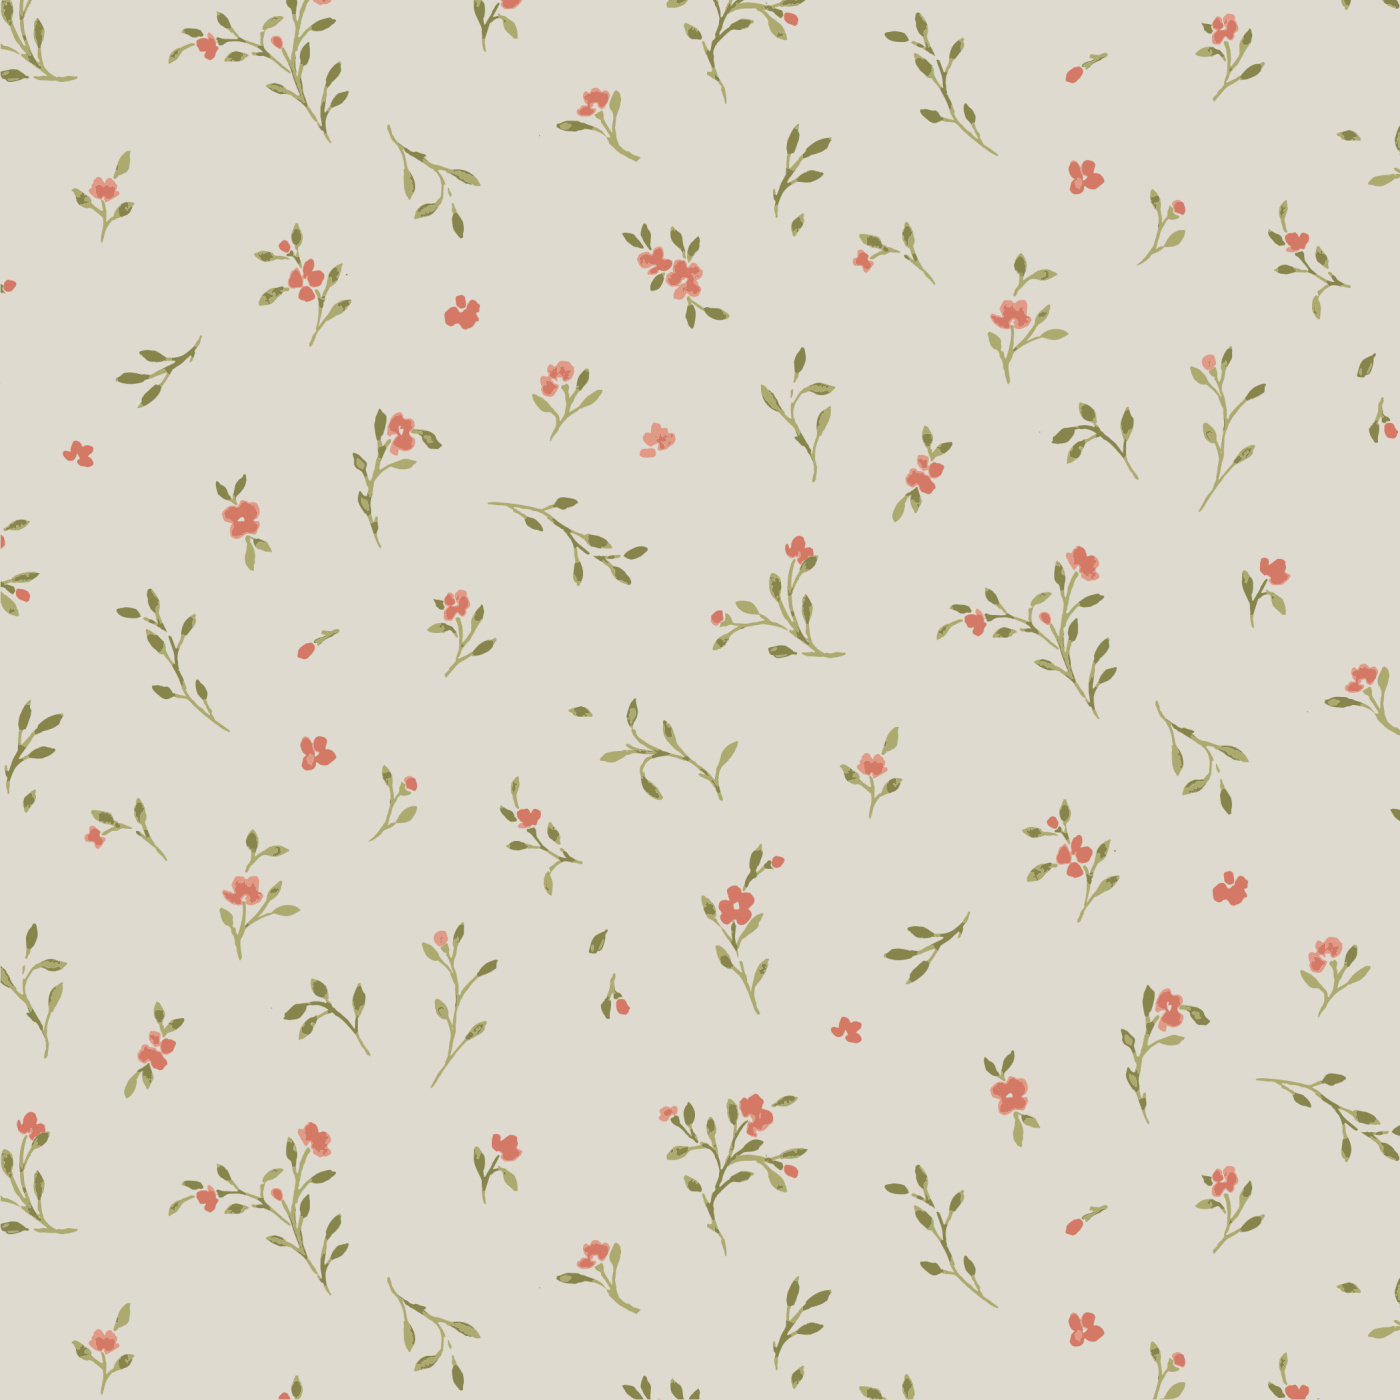 Itsy Ditsy Flowers Peel and Stick Removable Wallpaper